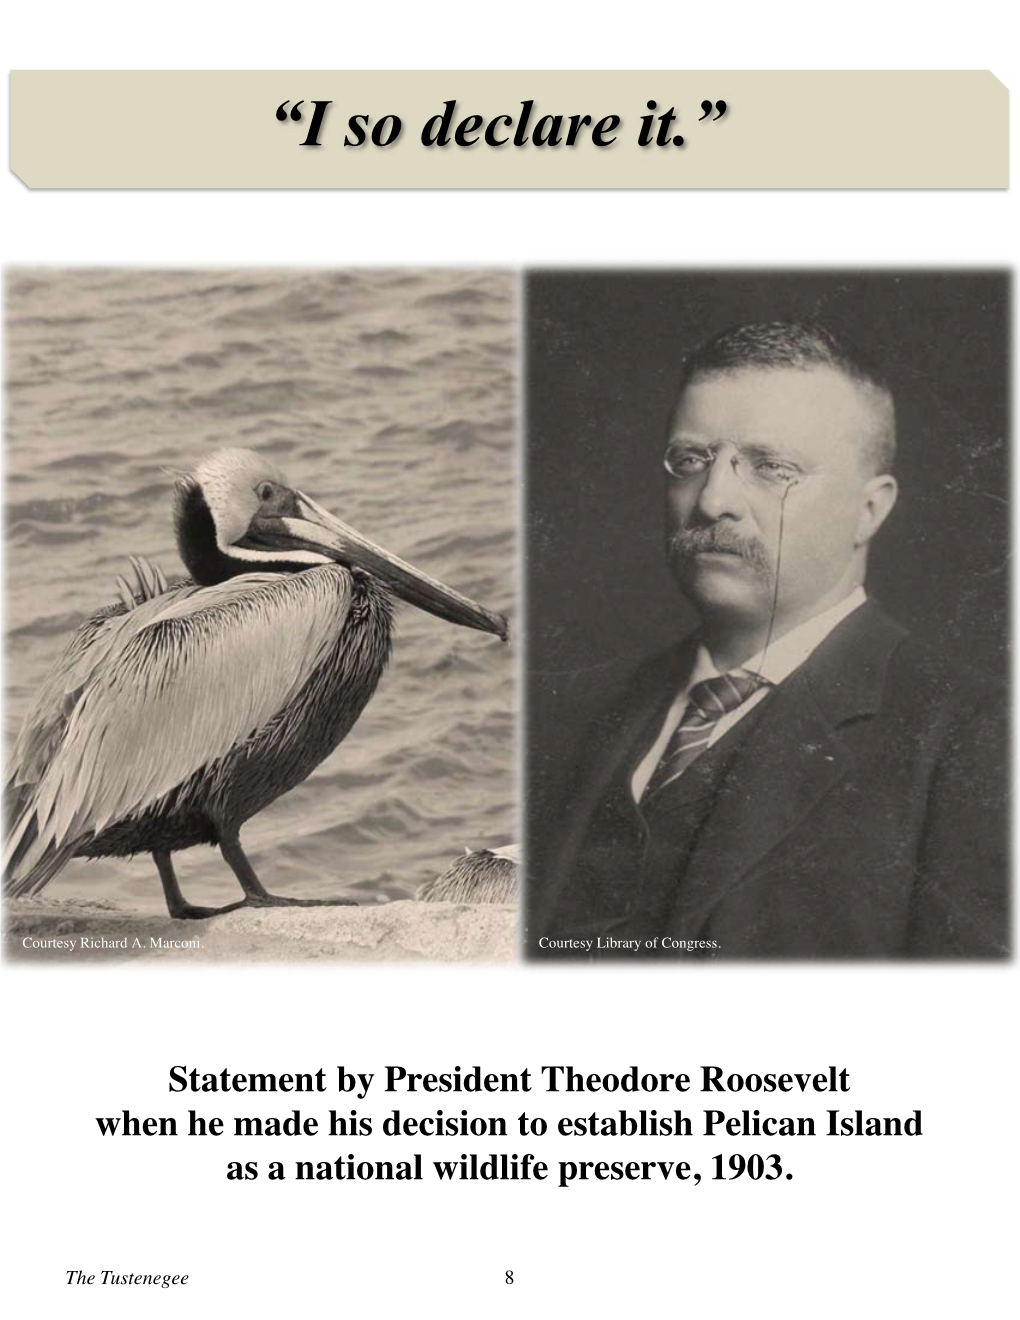 The Feather Wars and Theodore Roosevelt